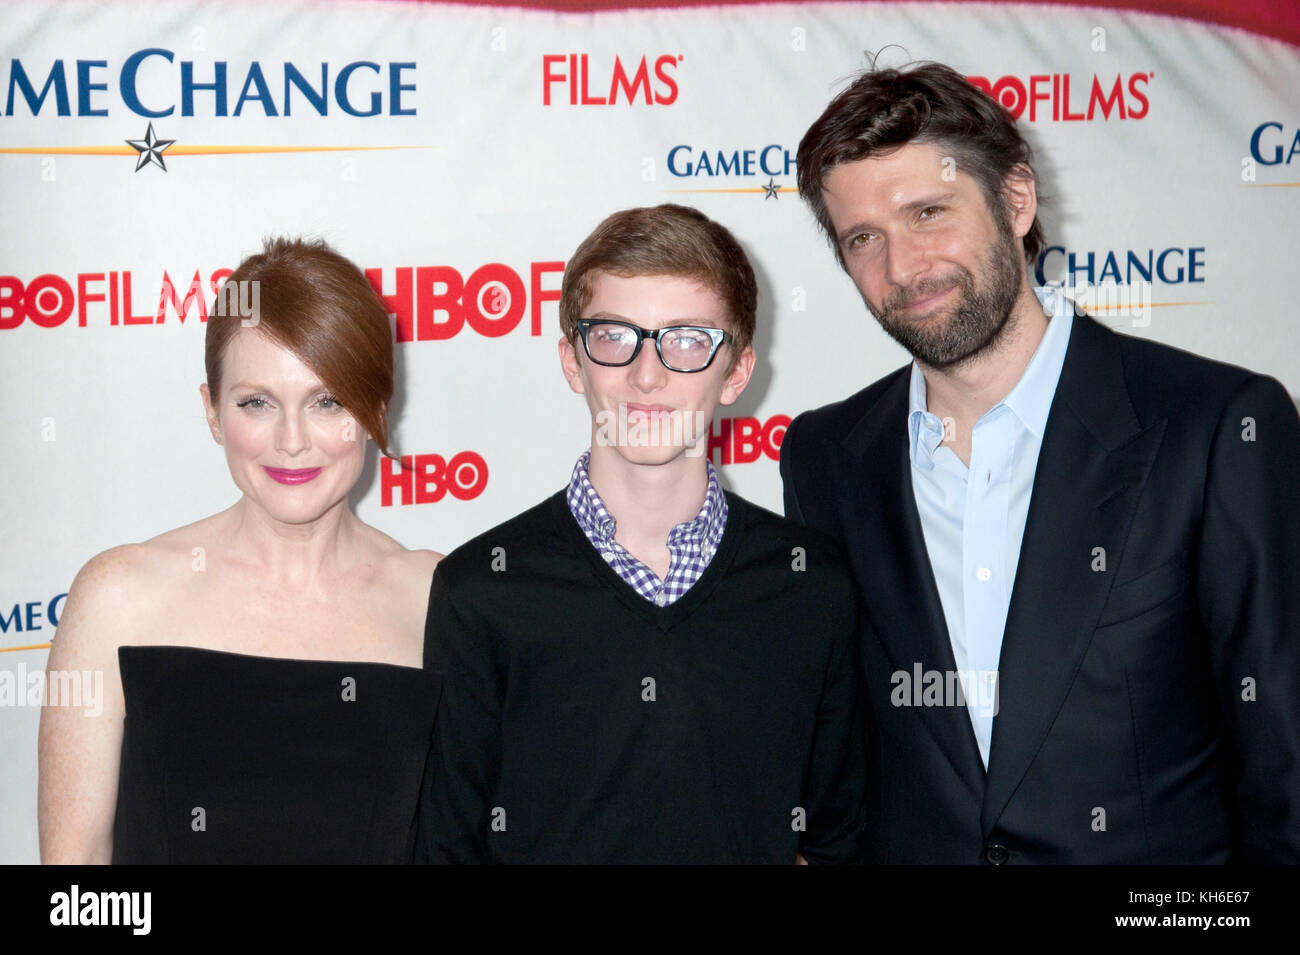 Julianne Moore with son Caleb Freundlich and husband Bart Freundlich at the screening of HBO Films Game Change at the Ziegfeld Theater in New York City. March 7, 2012. © Kristen Driscoll/Mediapunch Inc. Stock Photo